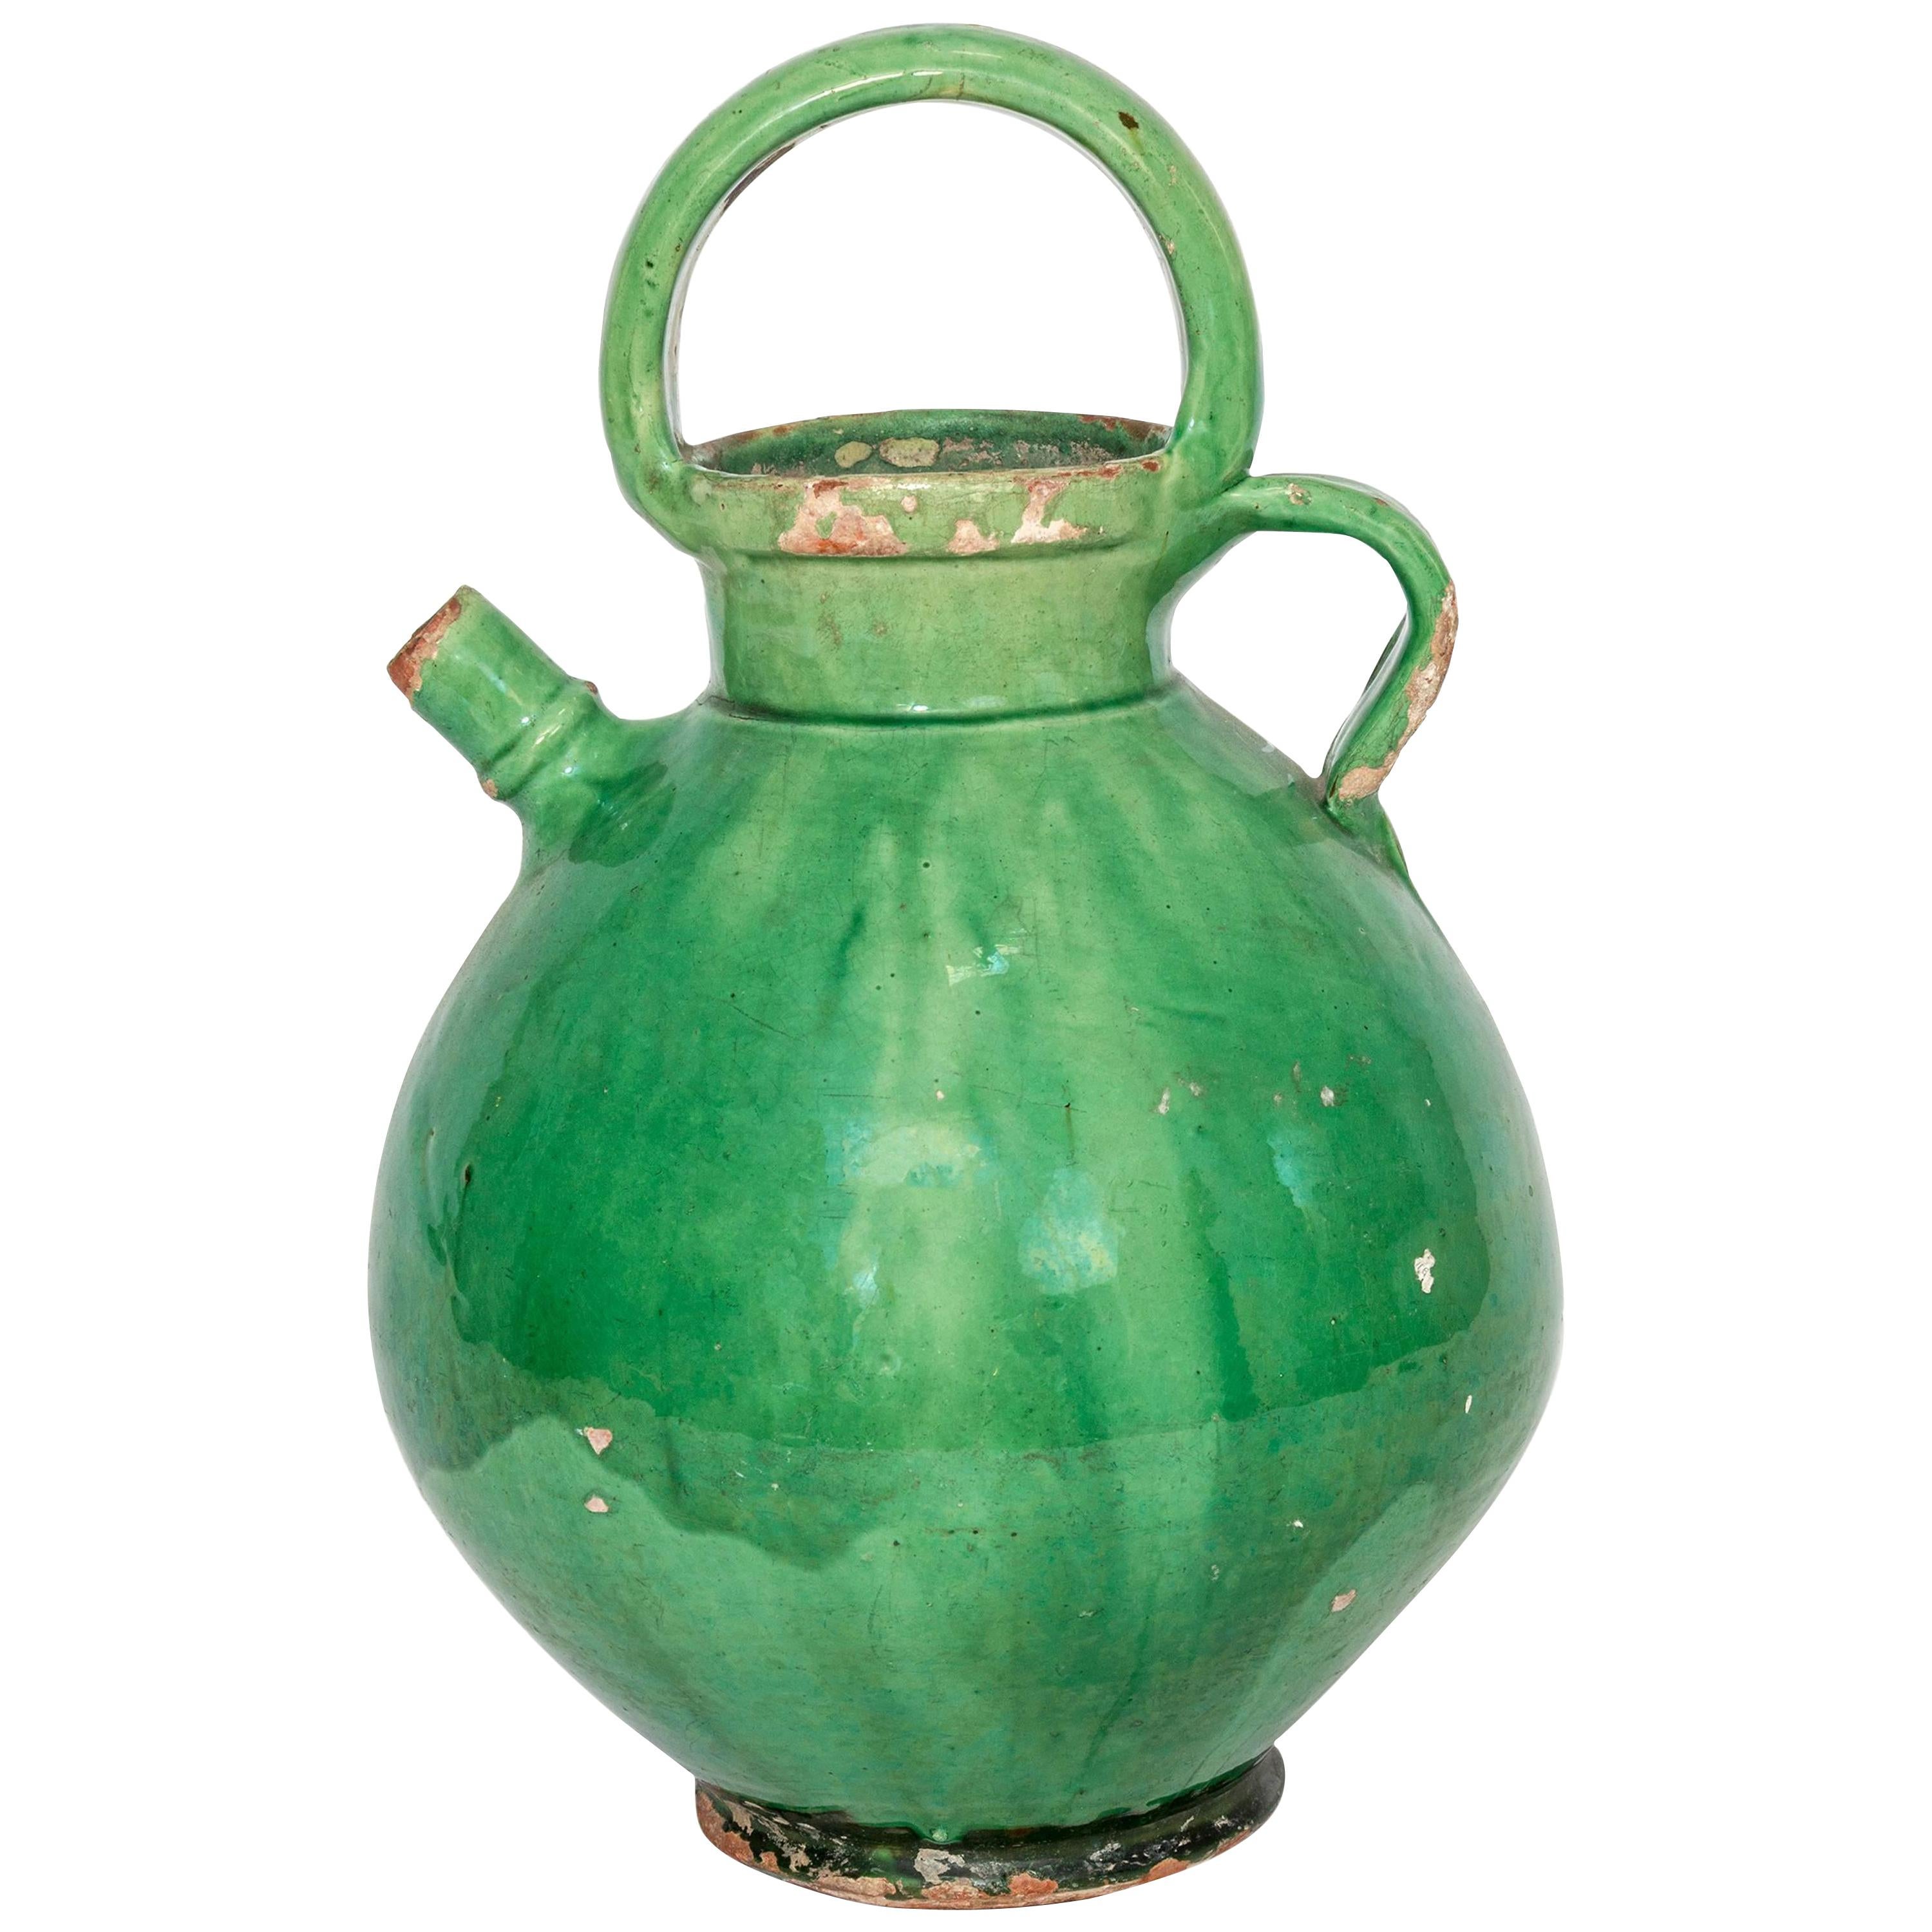 Large Green French Crockery Oil Vessel with handles